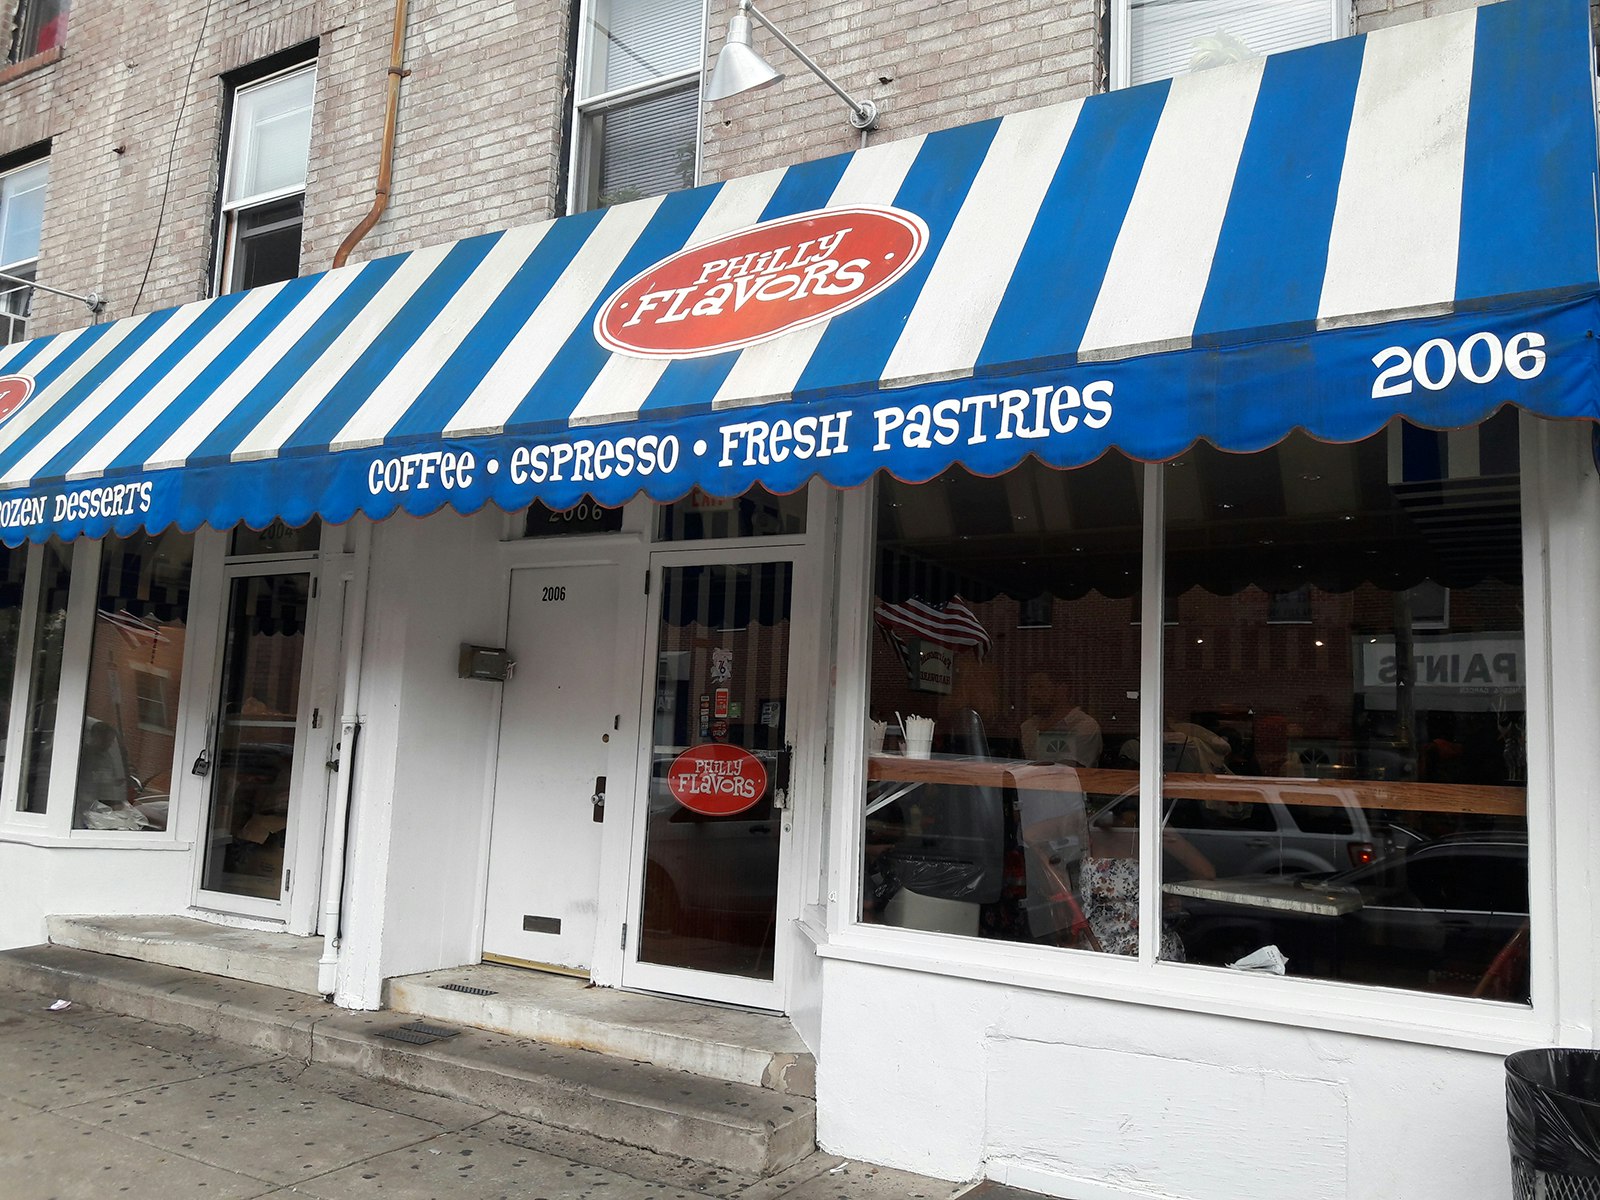 Storefront with glass windows, white trim and a blue-and-white awning that has the words ' Philly Flavors' in a red circle 